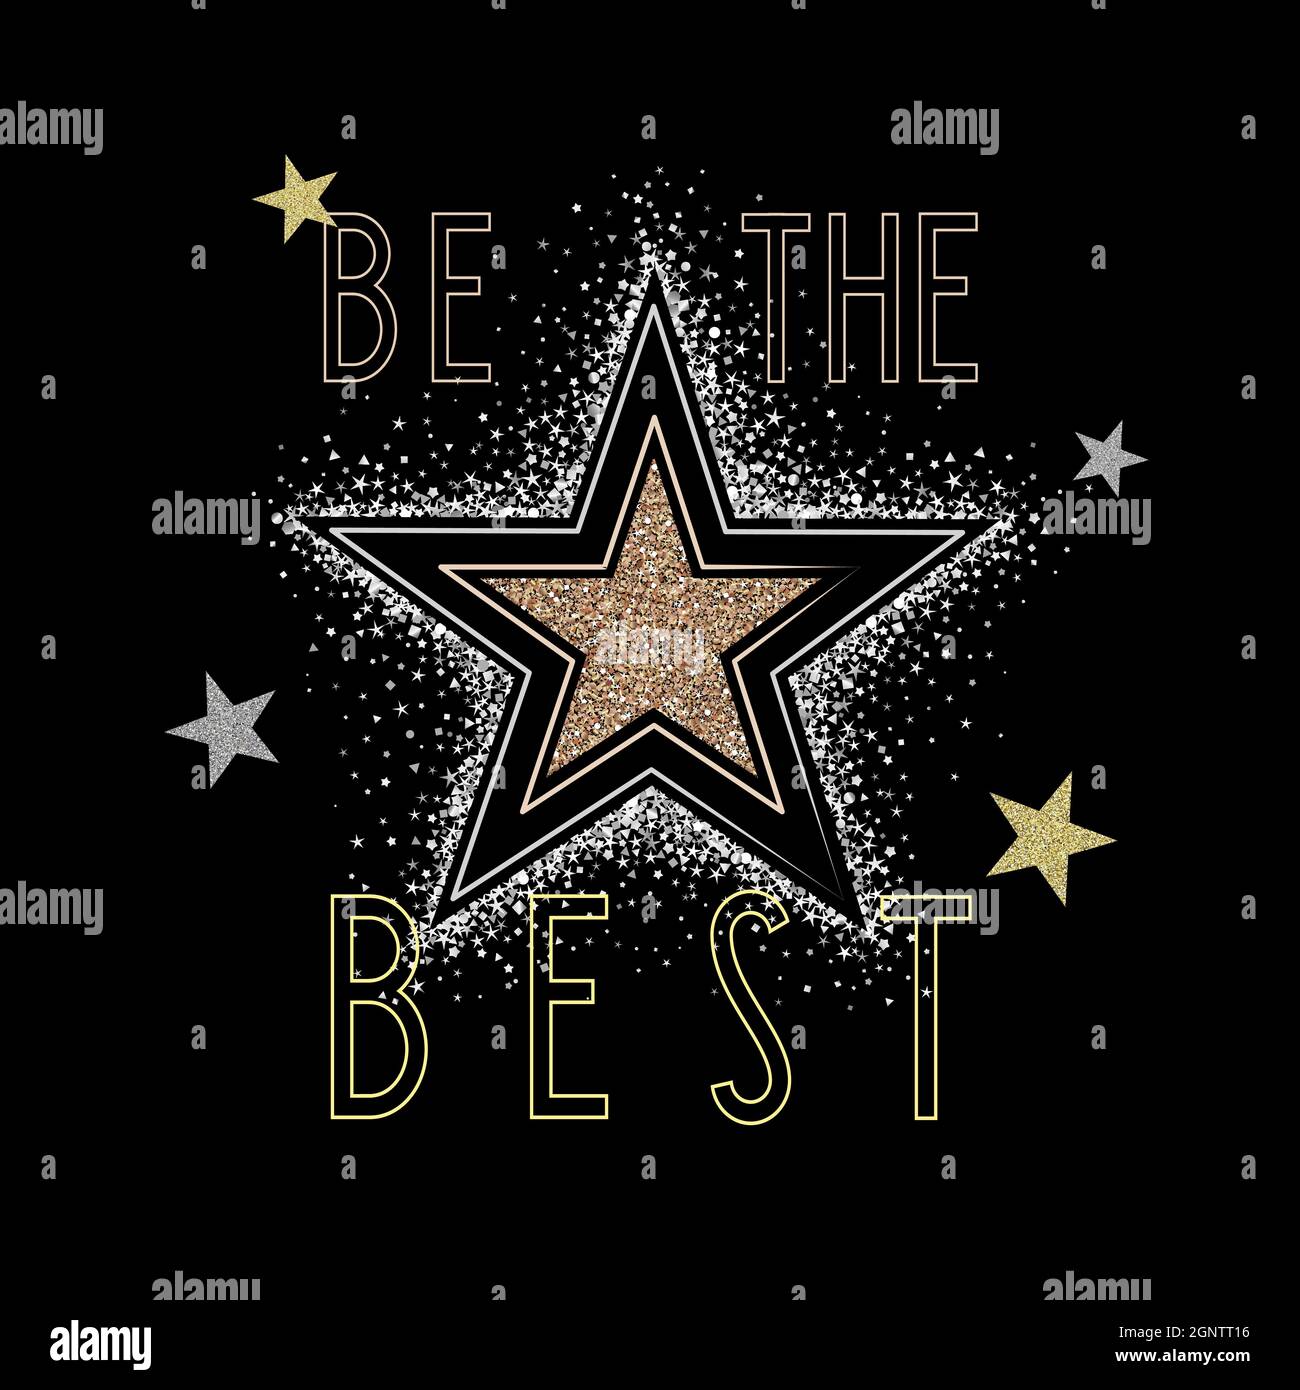 Be the BEST slogan vector print with glittering stars. Shine like a STAR rhinestone artwork on black background for t-shirt or other uses Stock Vector